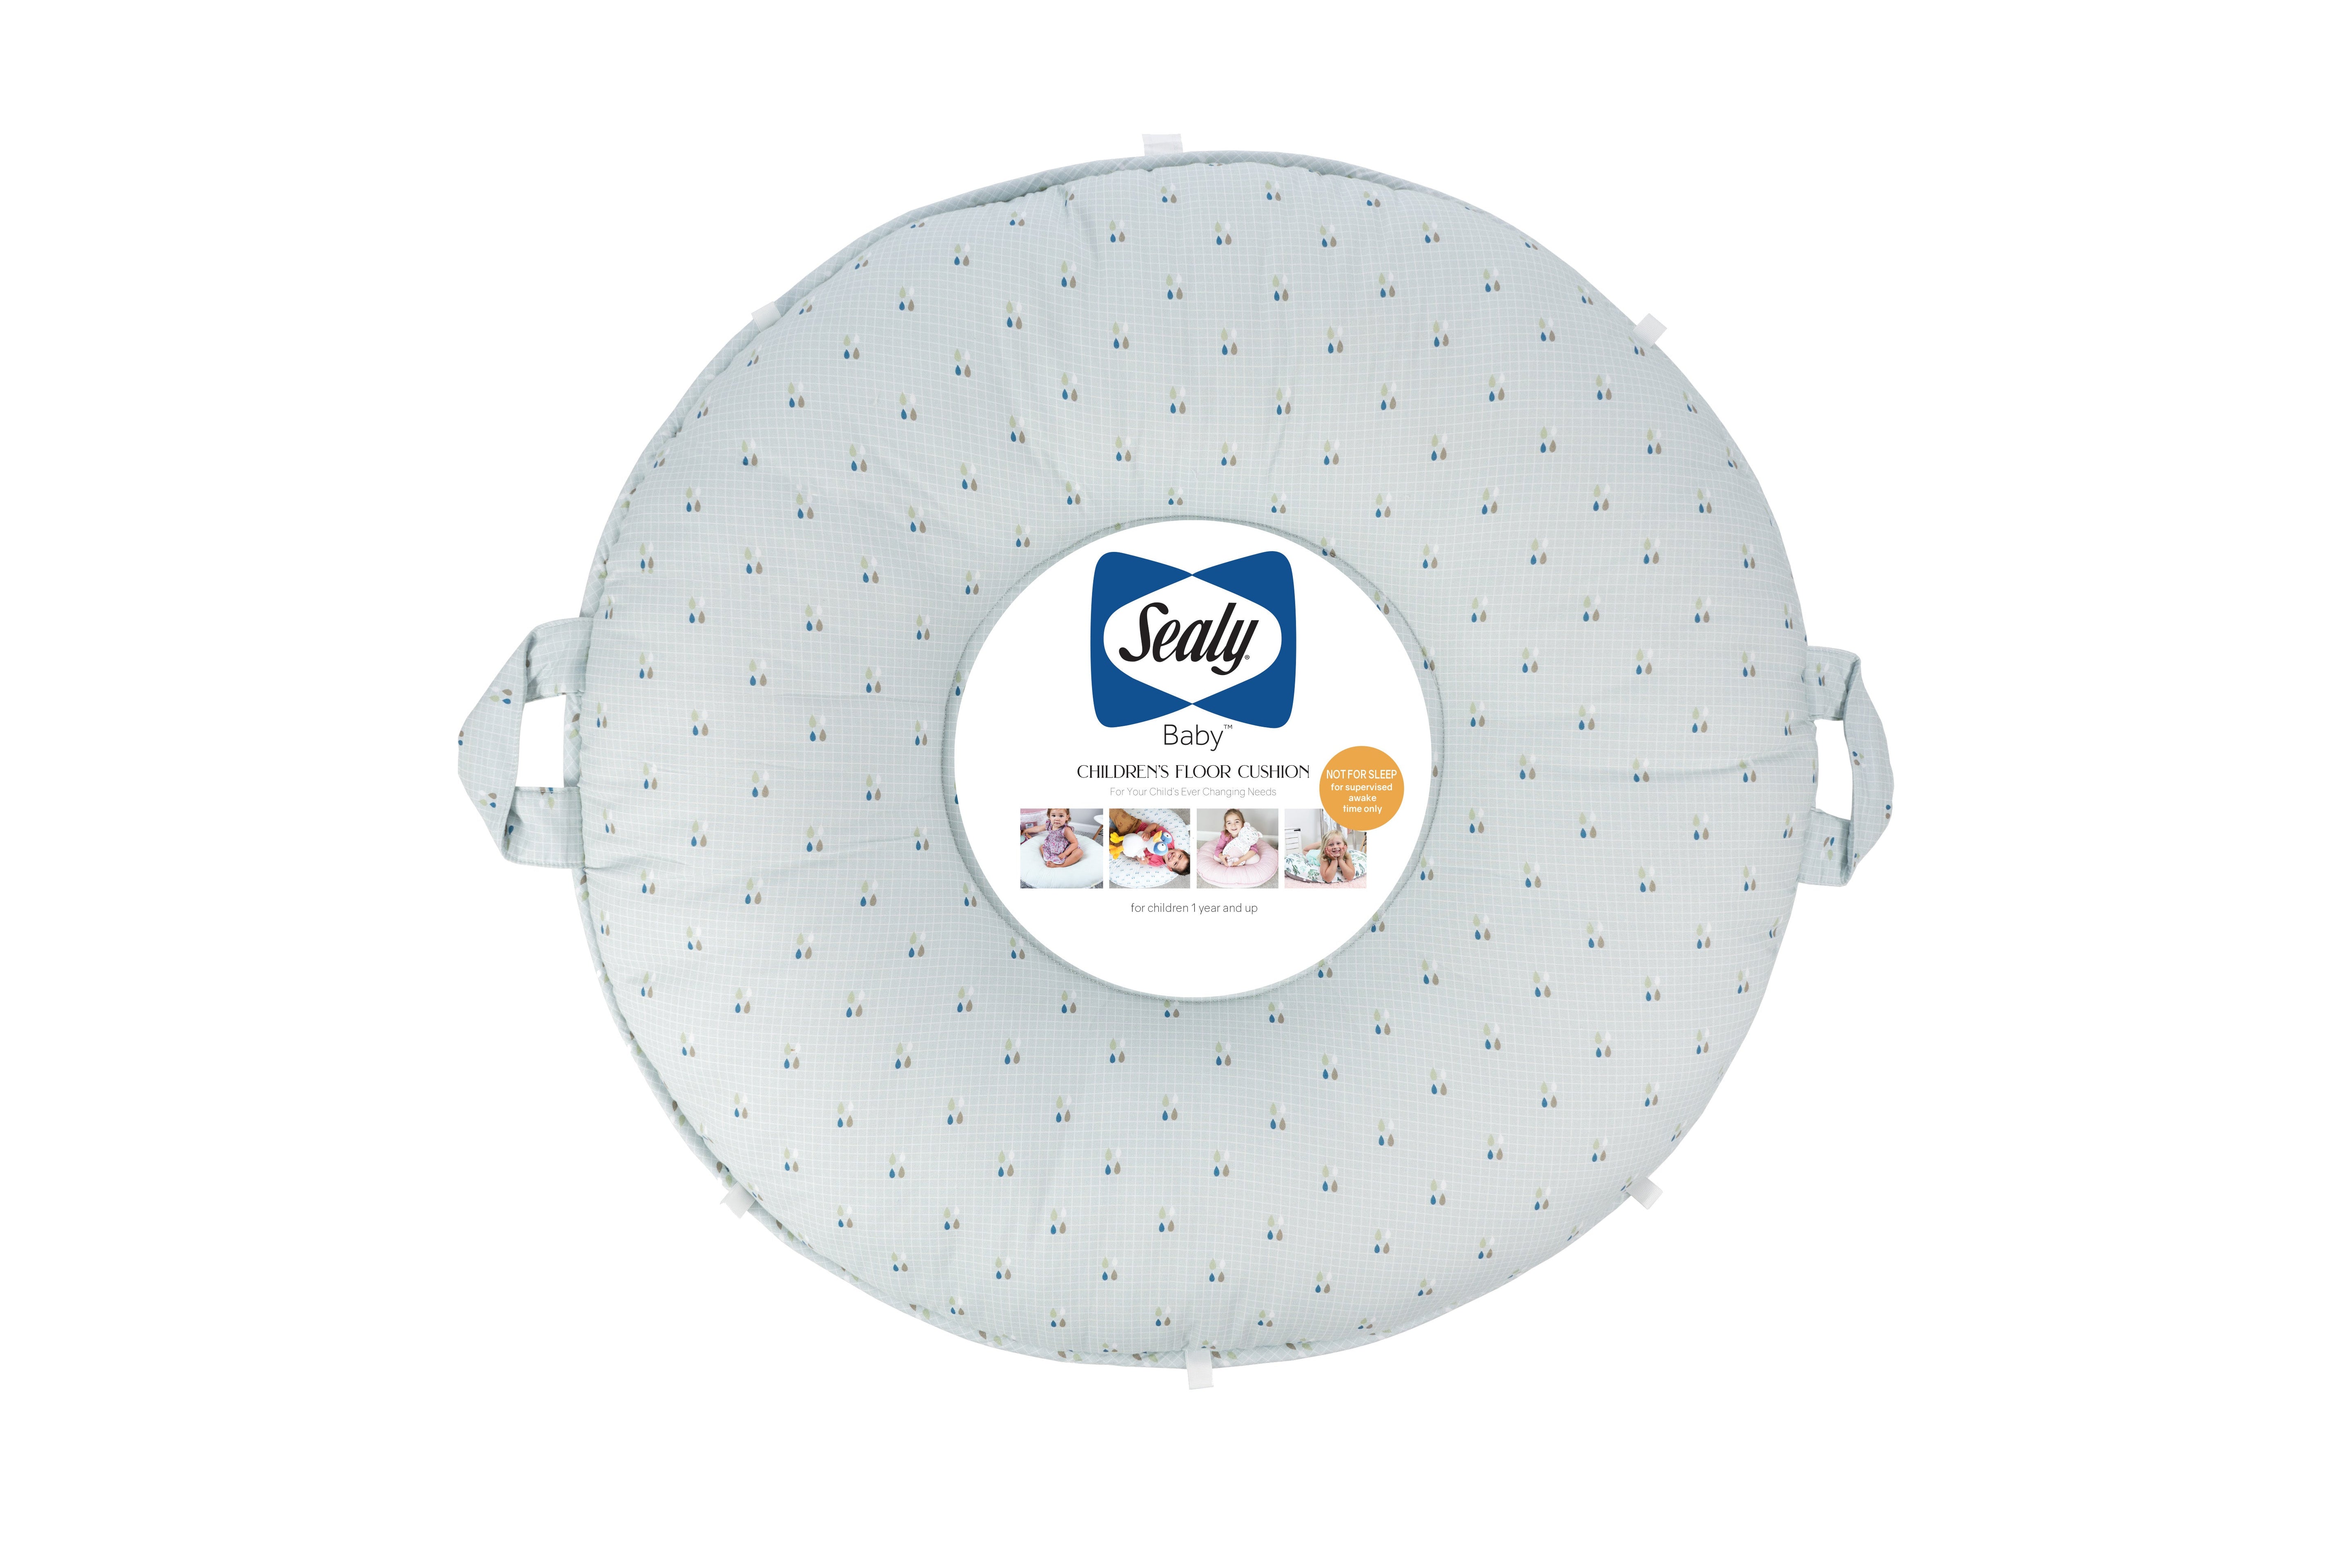 Sealy Children's Floor Cushion - Drops And Robin Blue